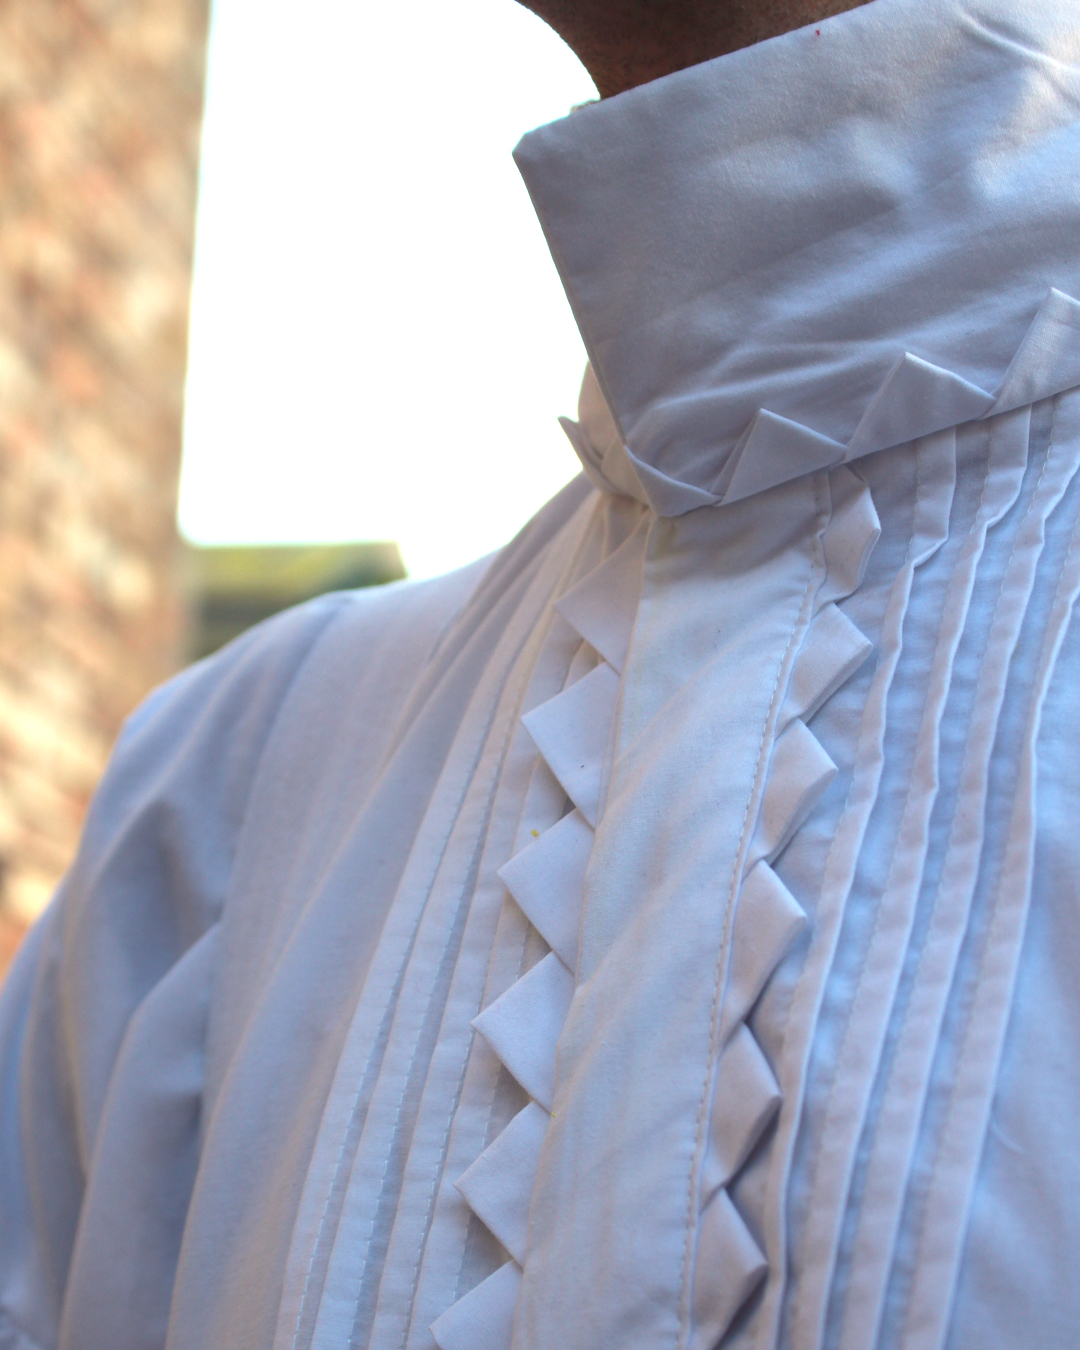 A close up photo of the under shirt. A white shirt with a hidden button closure and the same sort of zig-zag trim along the button placket, but this time in white fabric. The collar is a square standing up.